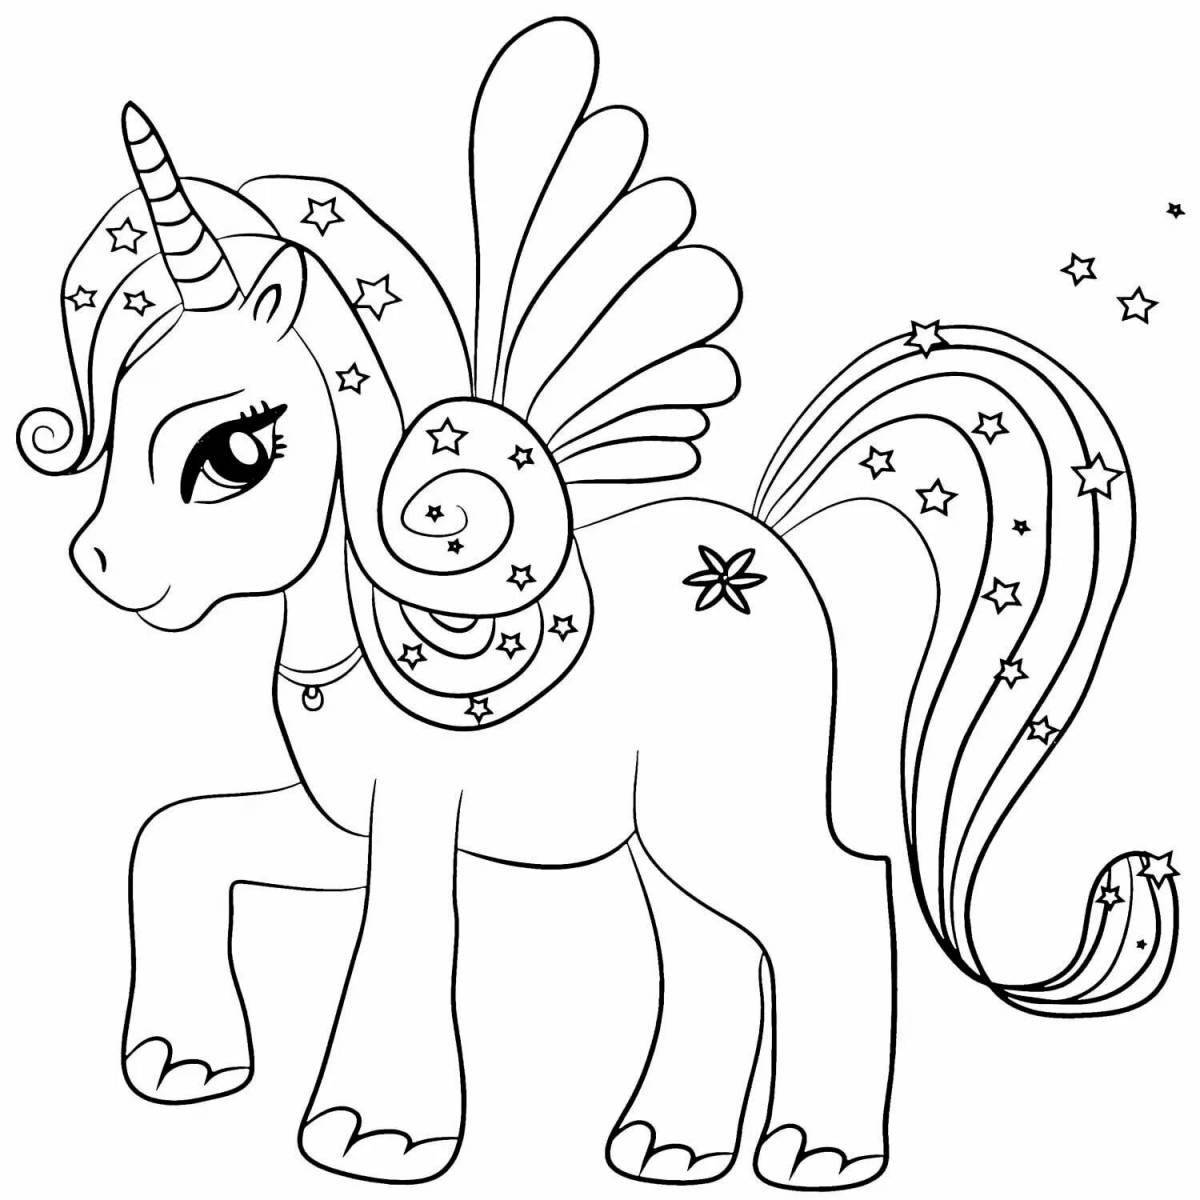 Great coloring book for girls 7 years old unicorn